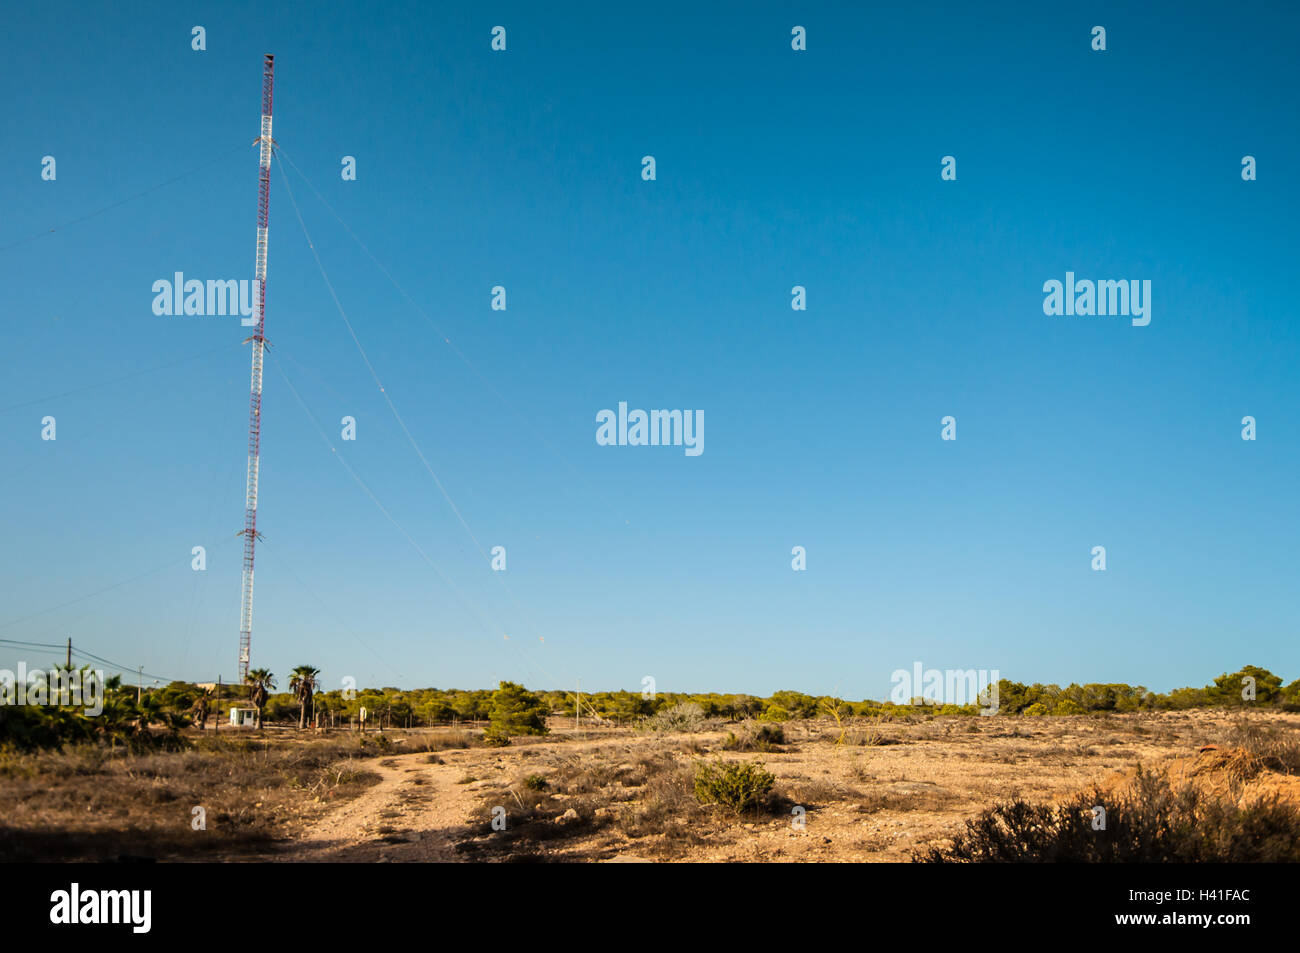 Torreta de Guardamar is a 370m tall guyed radio mast erected by the US Navy near Guardamar del Segura, Spain, Europe. Tallest structure in EU. Tower Stock Photo